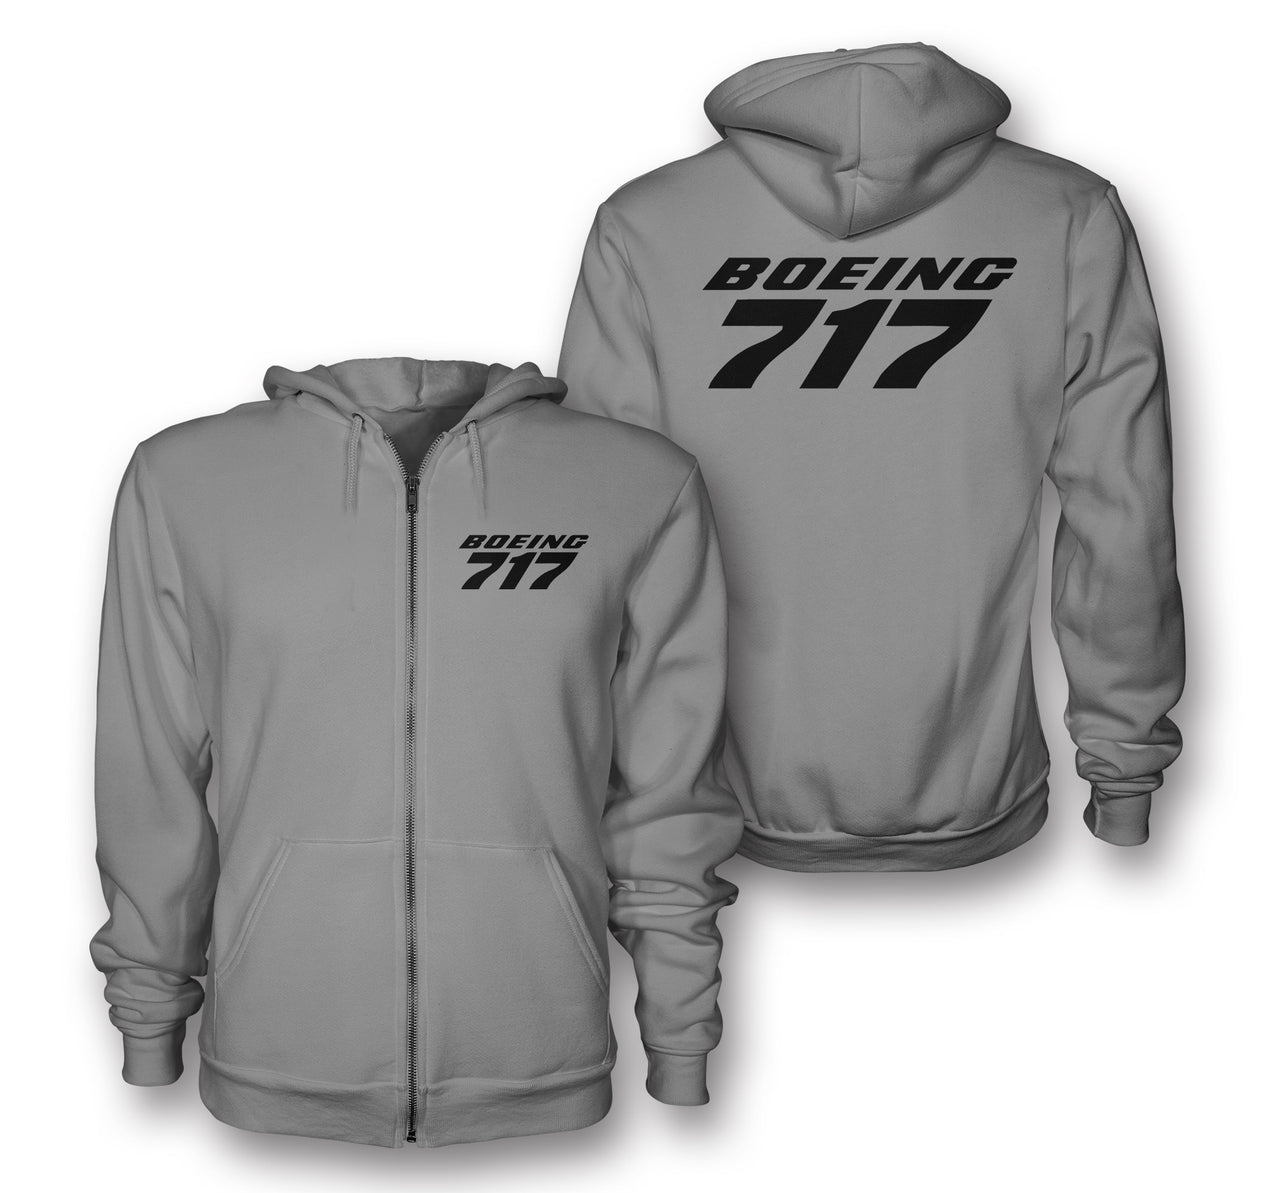 Boeing 717 & Text Designed Zipped Hoodies